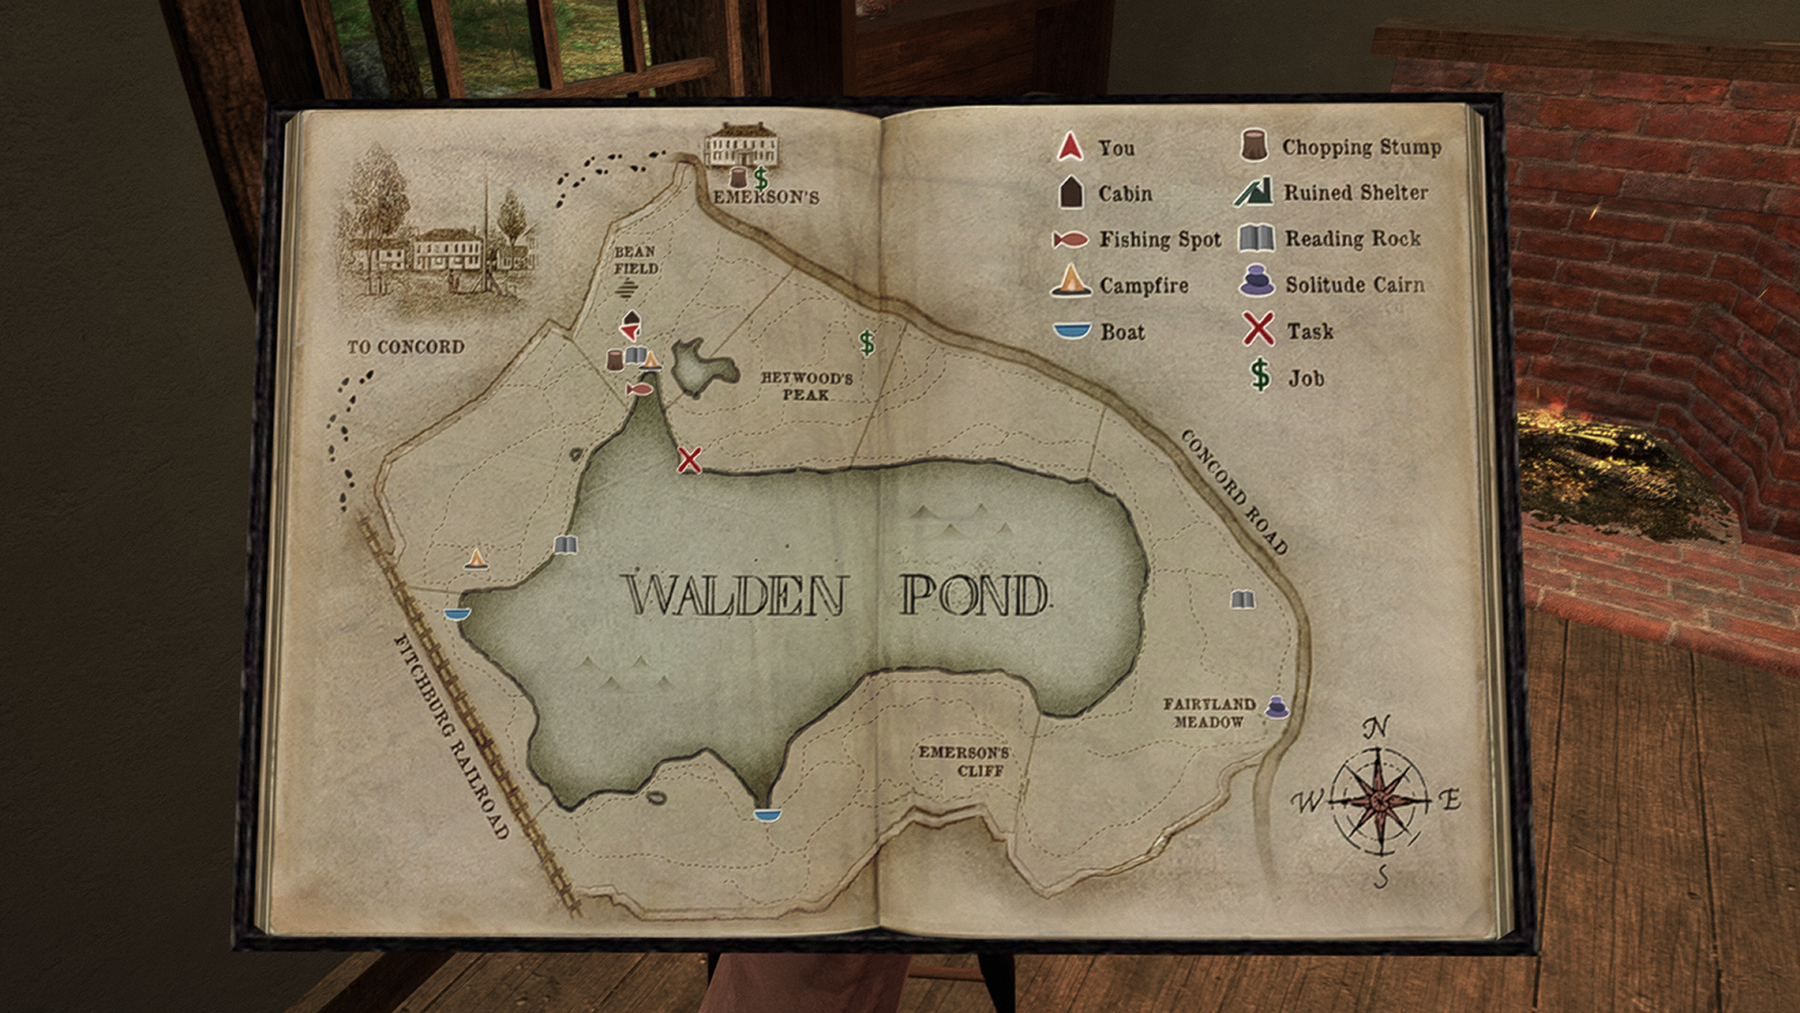 Illustrated map of Walden Pond. Credit: Walden, a game screenshot, Copyright 2017-2021 Tracy Fullerton and the Walden Team